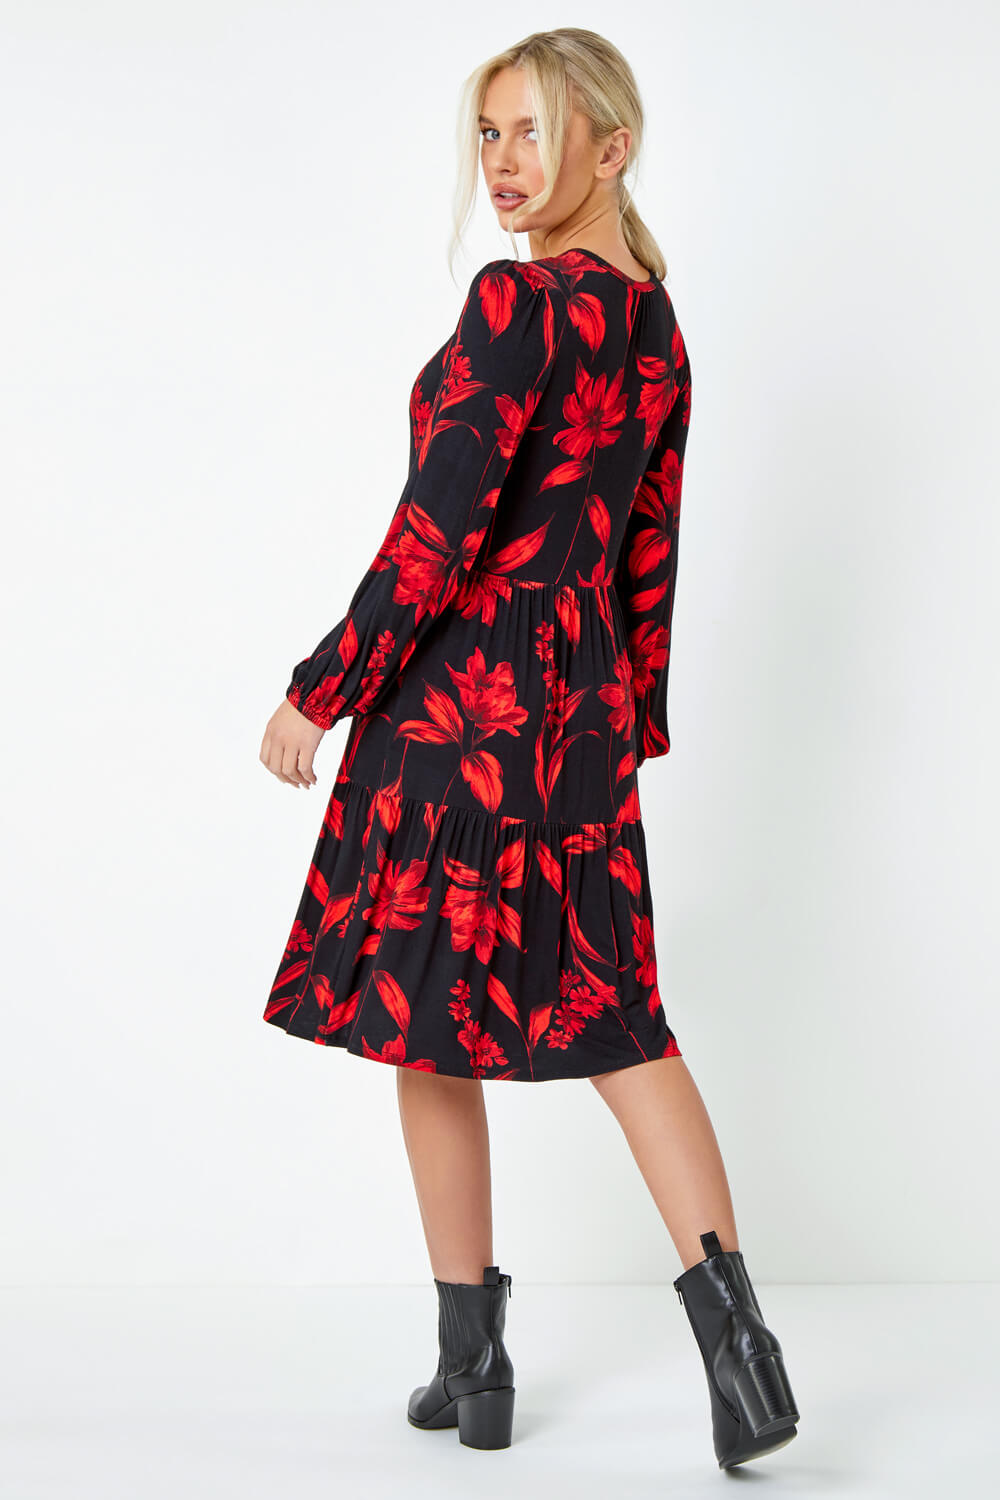 Red Petite Floral Print Tiered Stretch Dress, Image 3 of 5